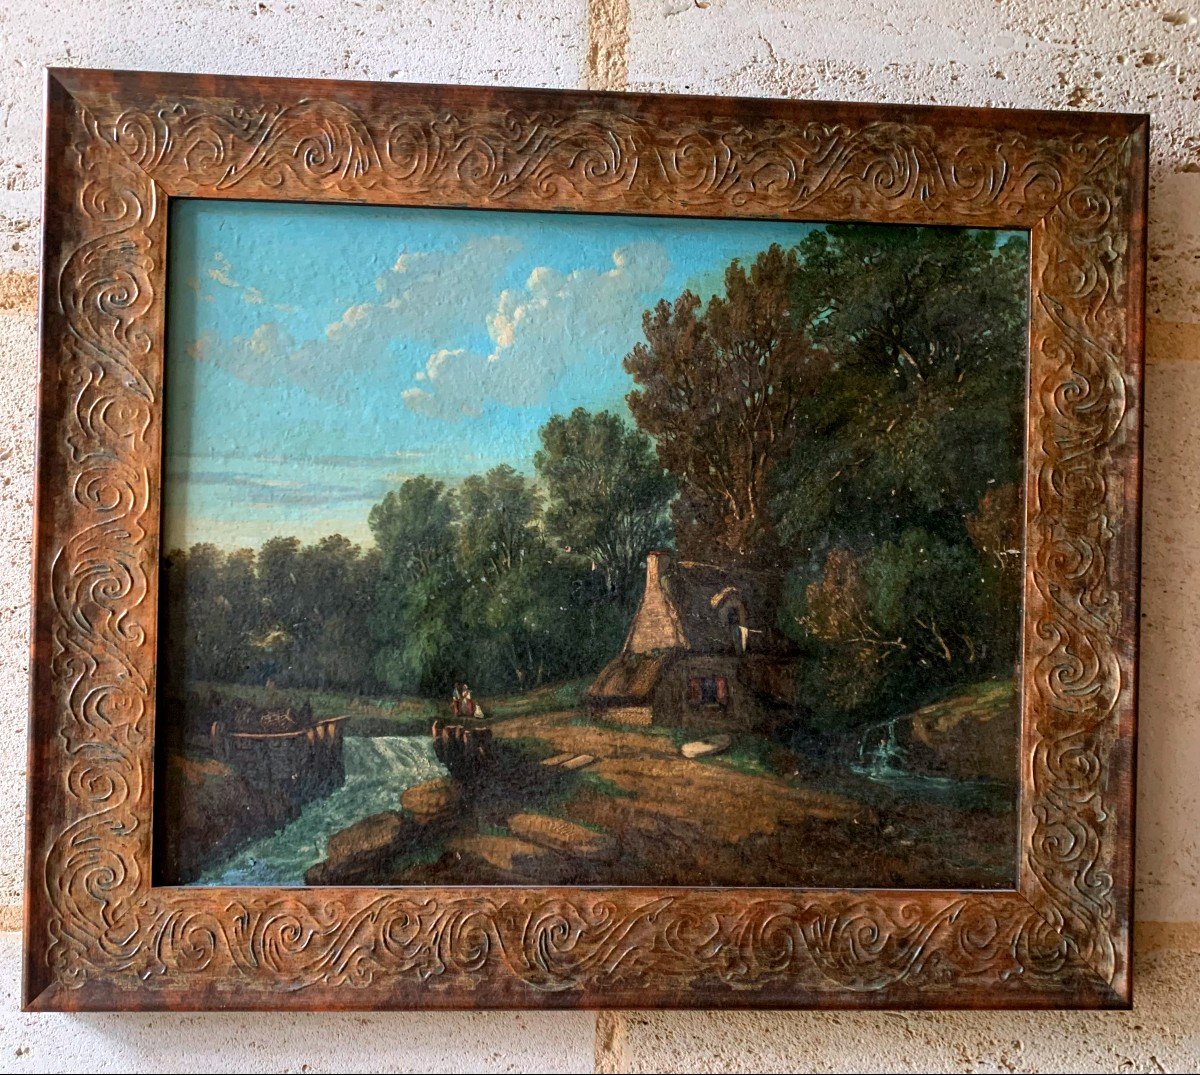 Hsp Signed By Marandon De Montyel And Dated 1848 “le Moulin”